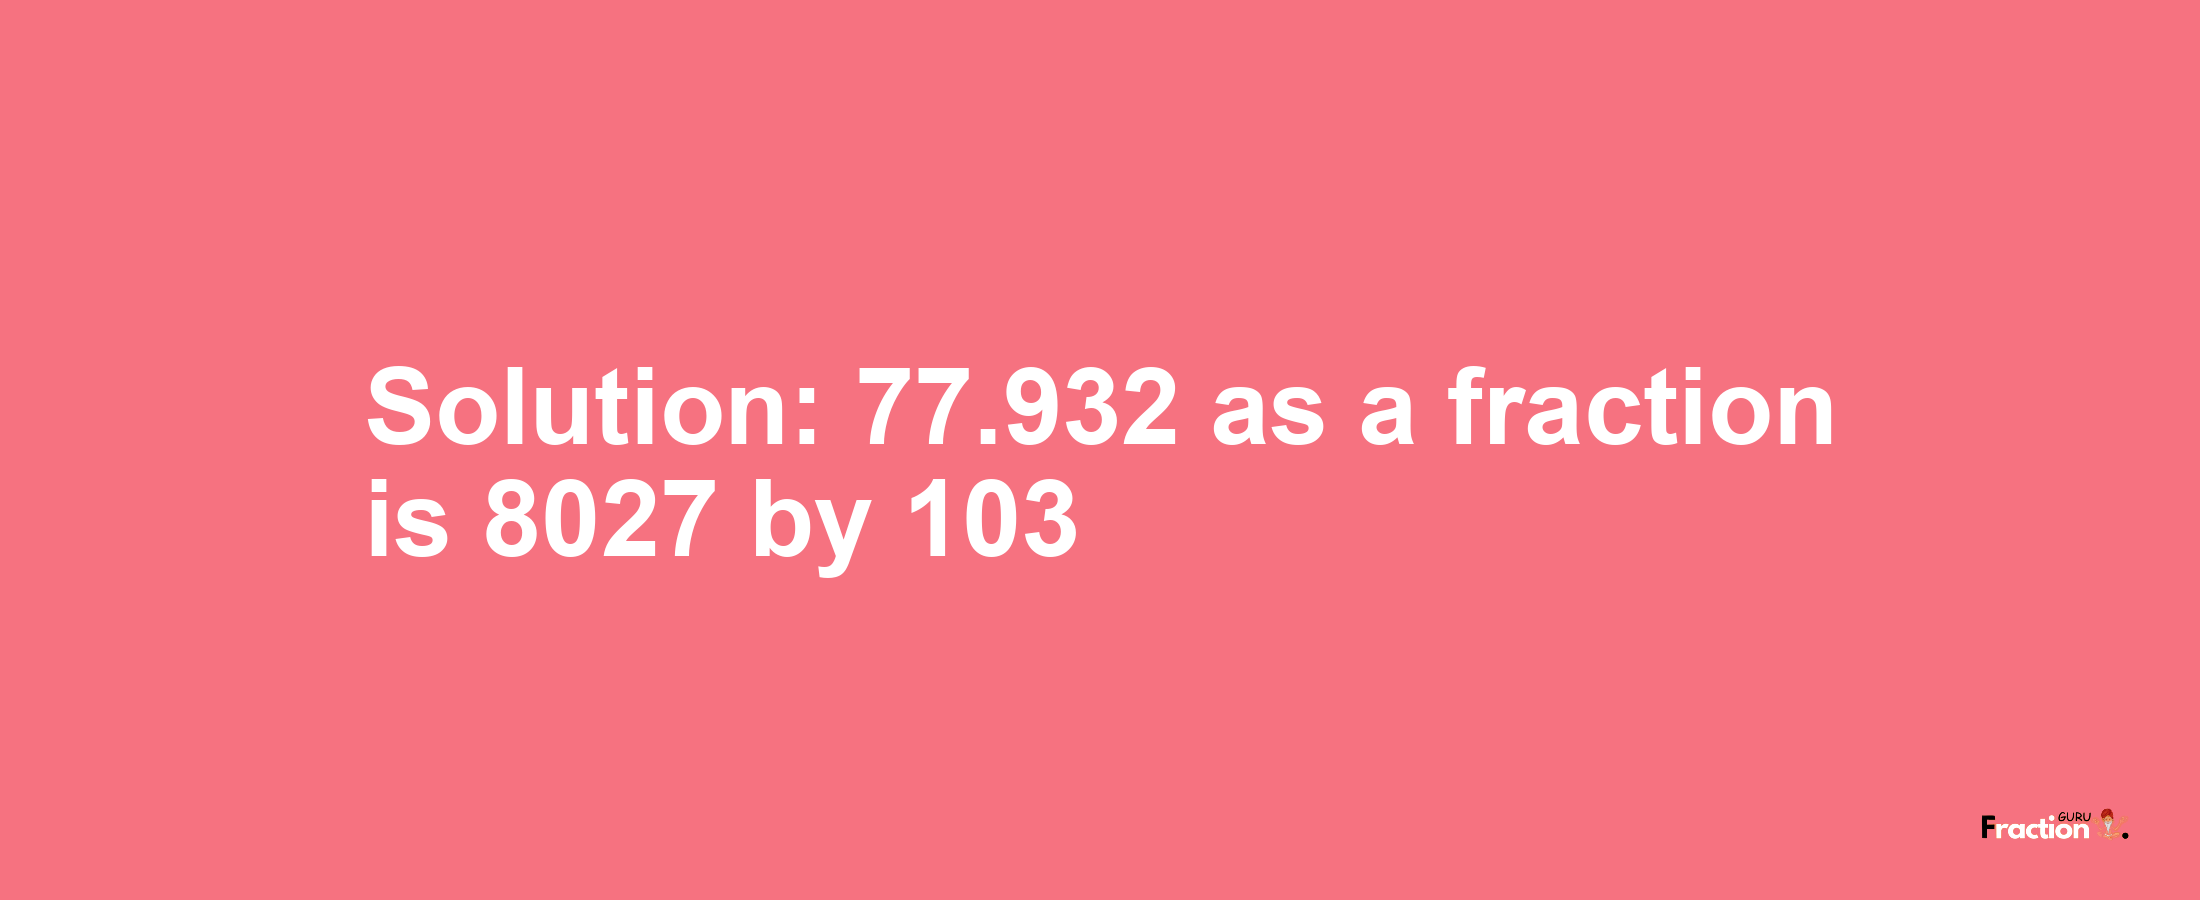 Solution:77.932 as a fraction is 8027/103